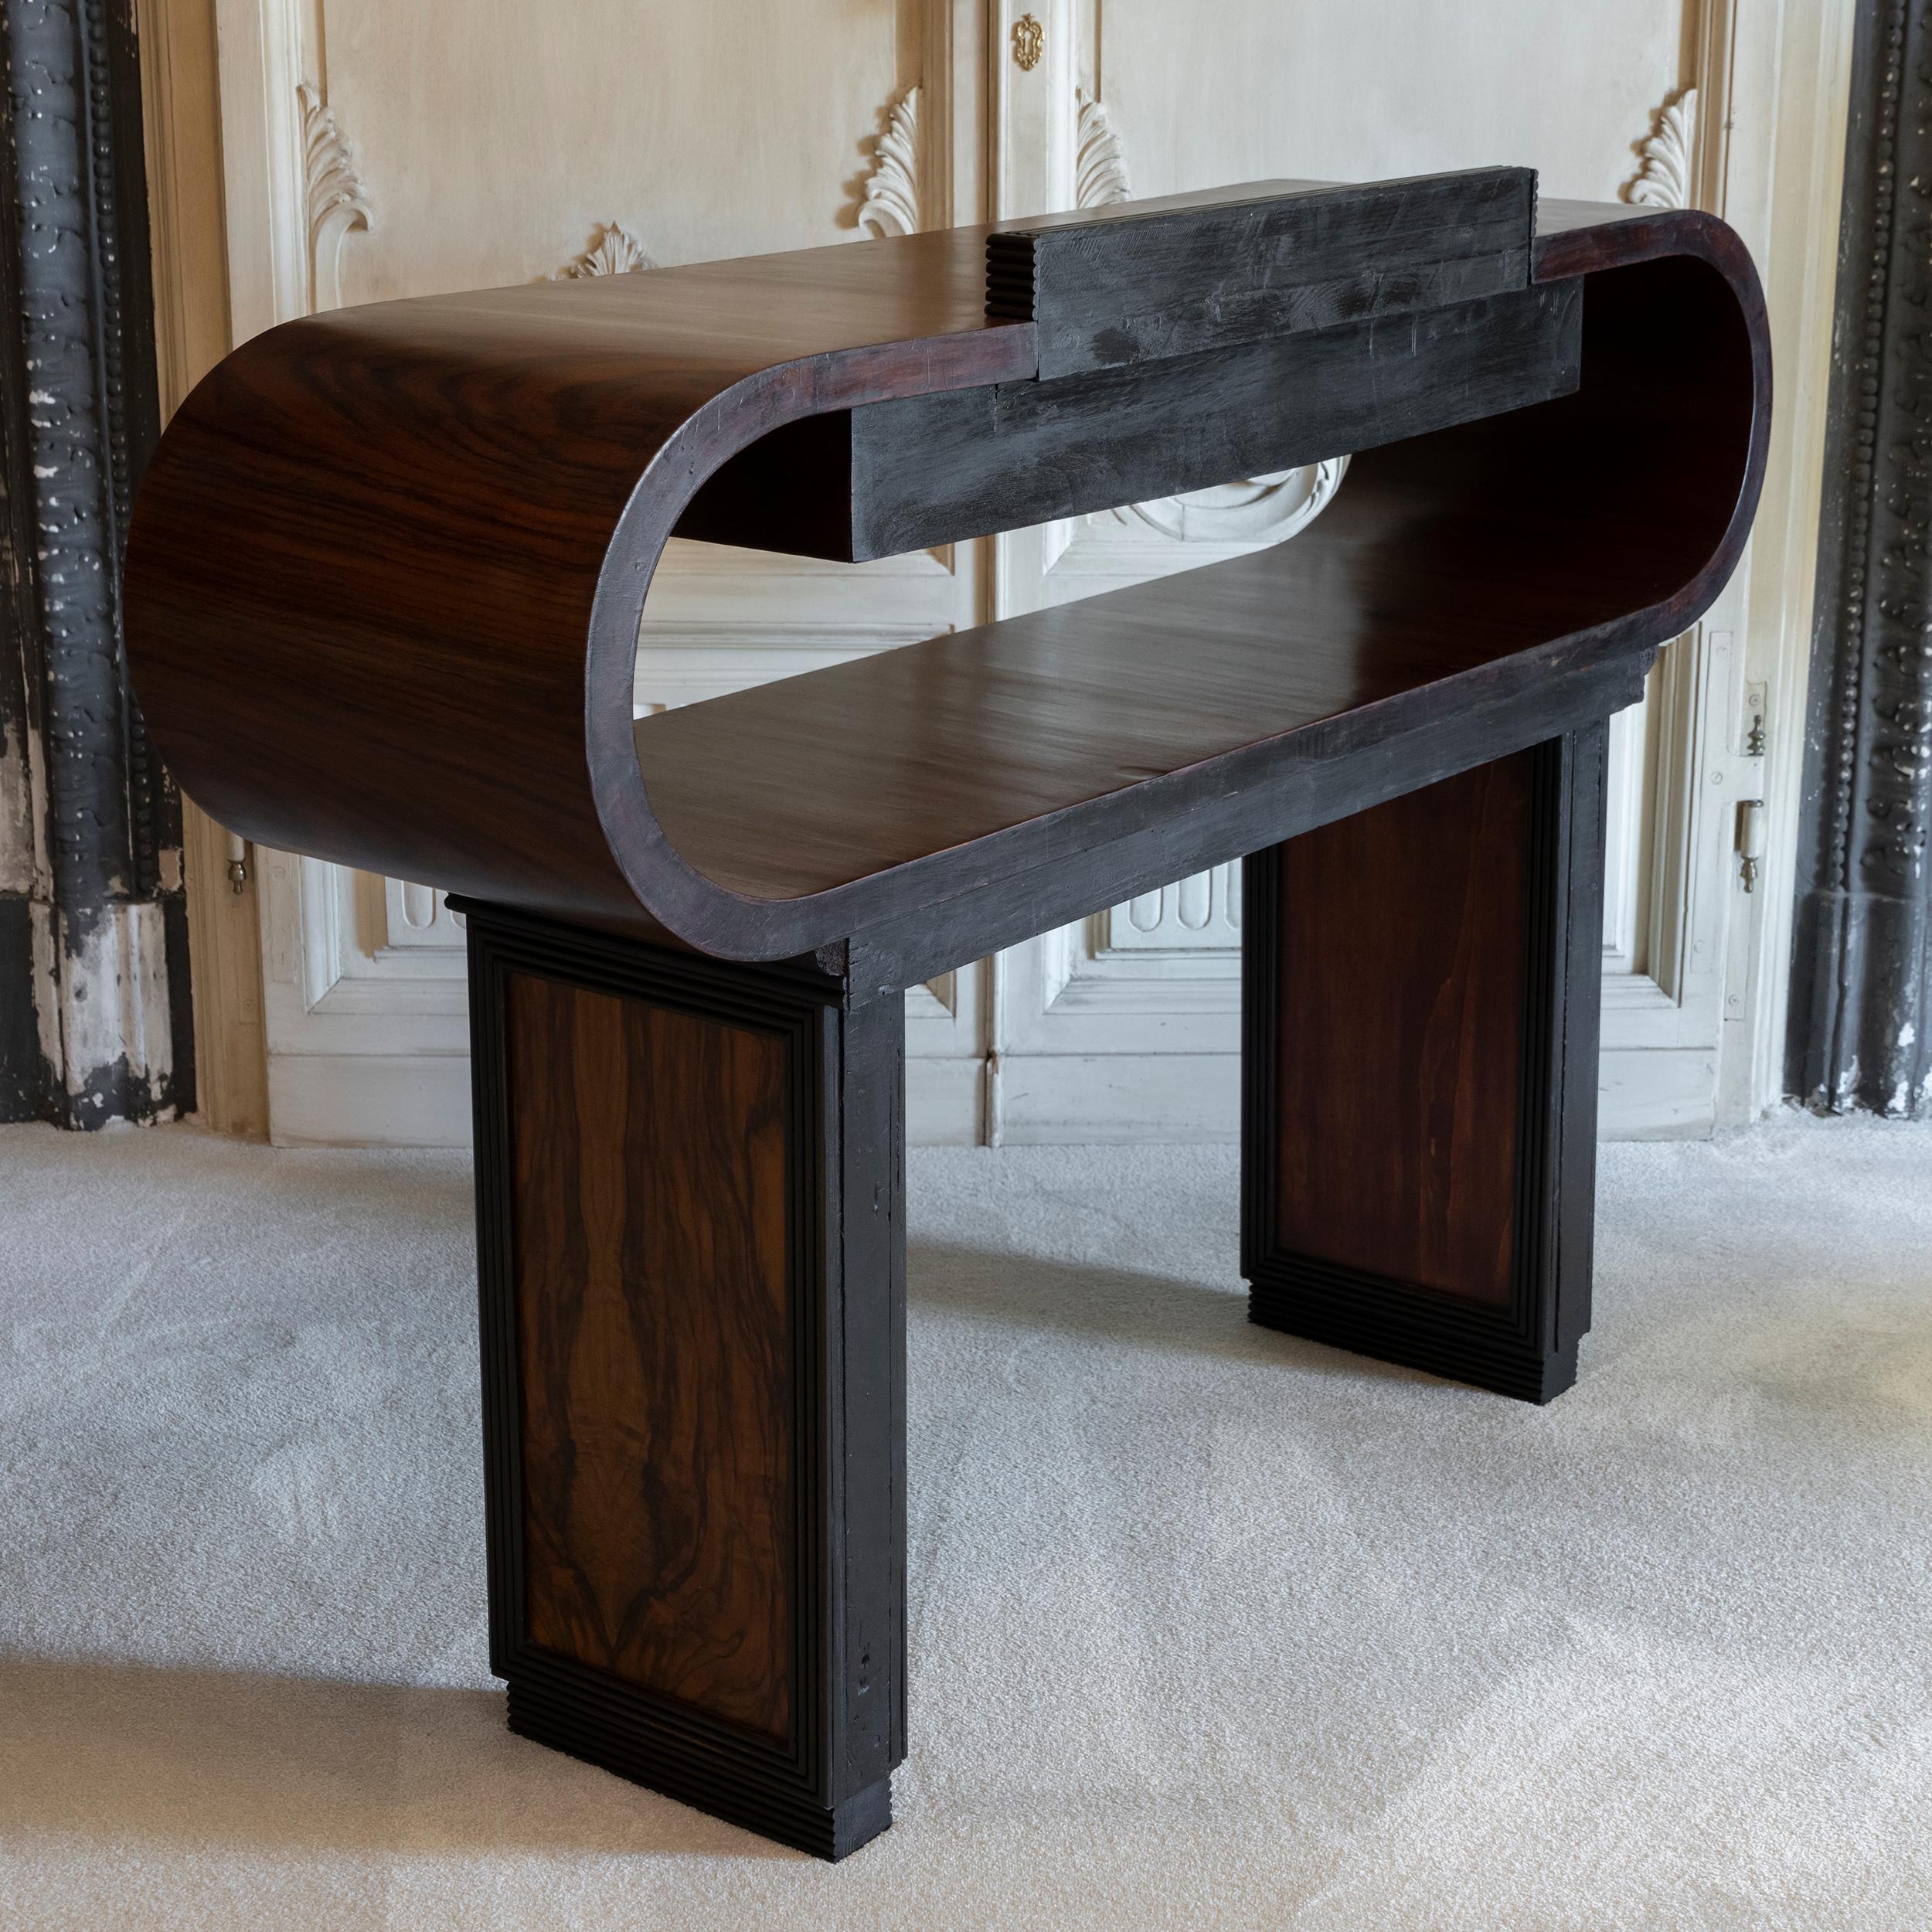 1930s Italian Deco Console Table with Drawers Palisander, Mahogany and Walnut For Sale 2